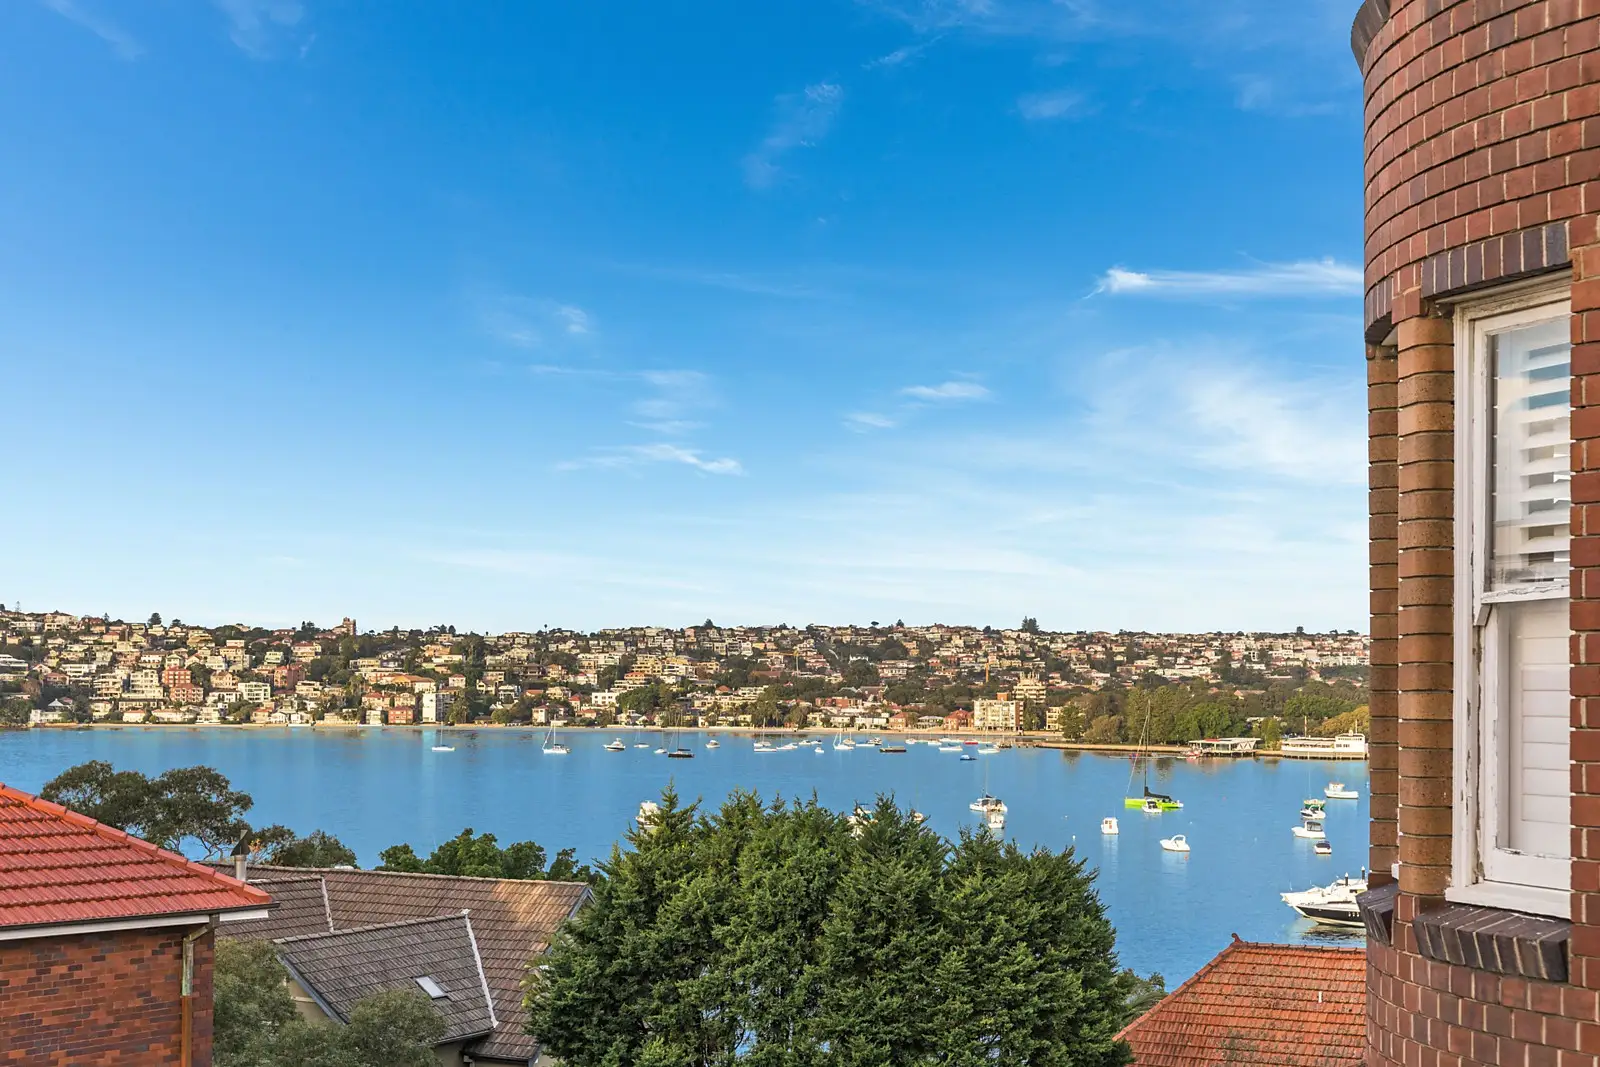 Photo #1: 5/1 Wyuna Road, Point Piper - Sold by Sydney Sotheby's International Realty